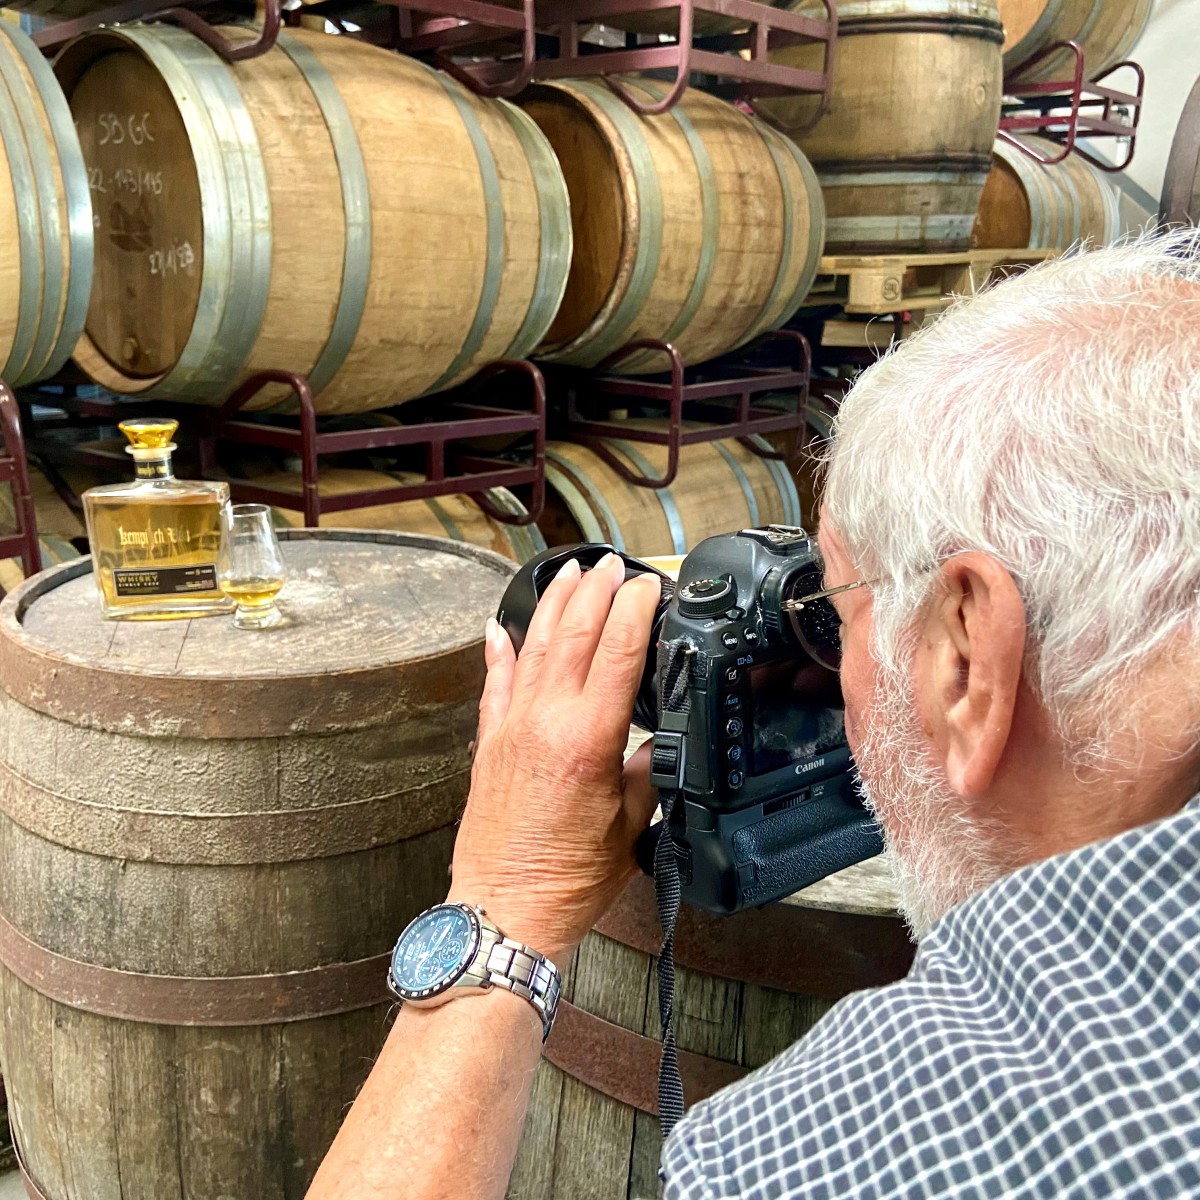 The Making of……..Kempisch Vuur Whisky